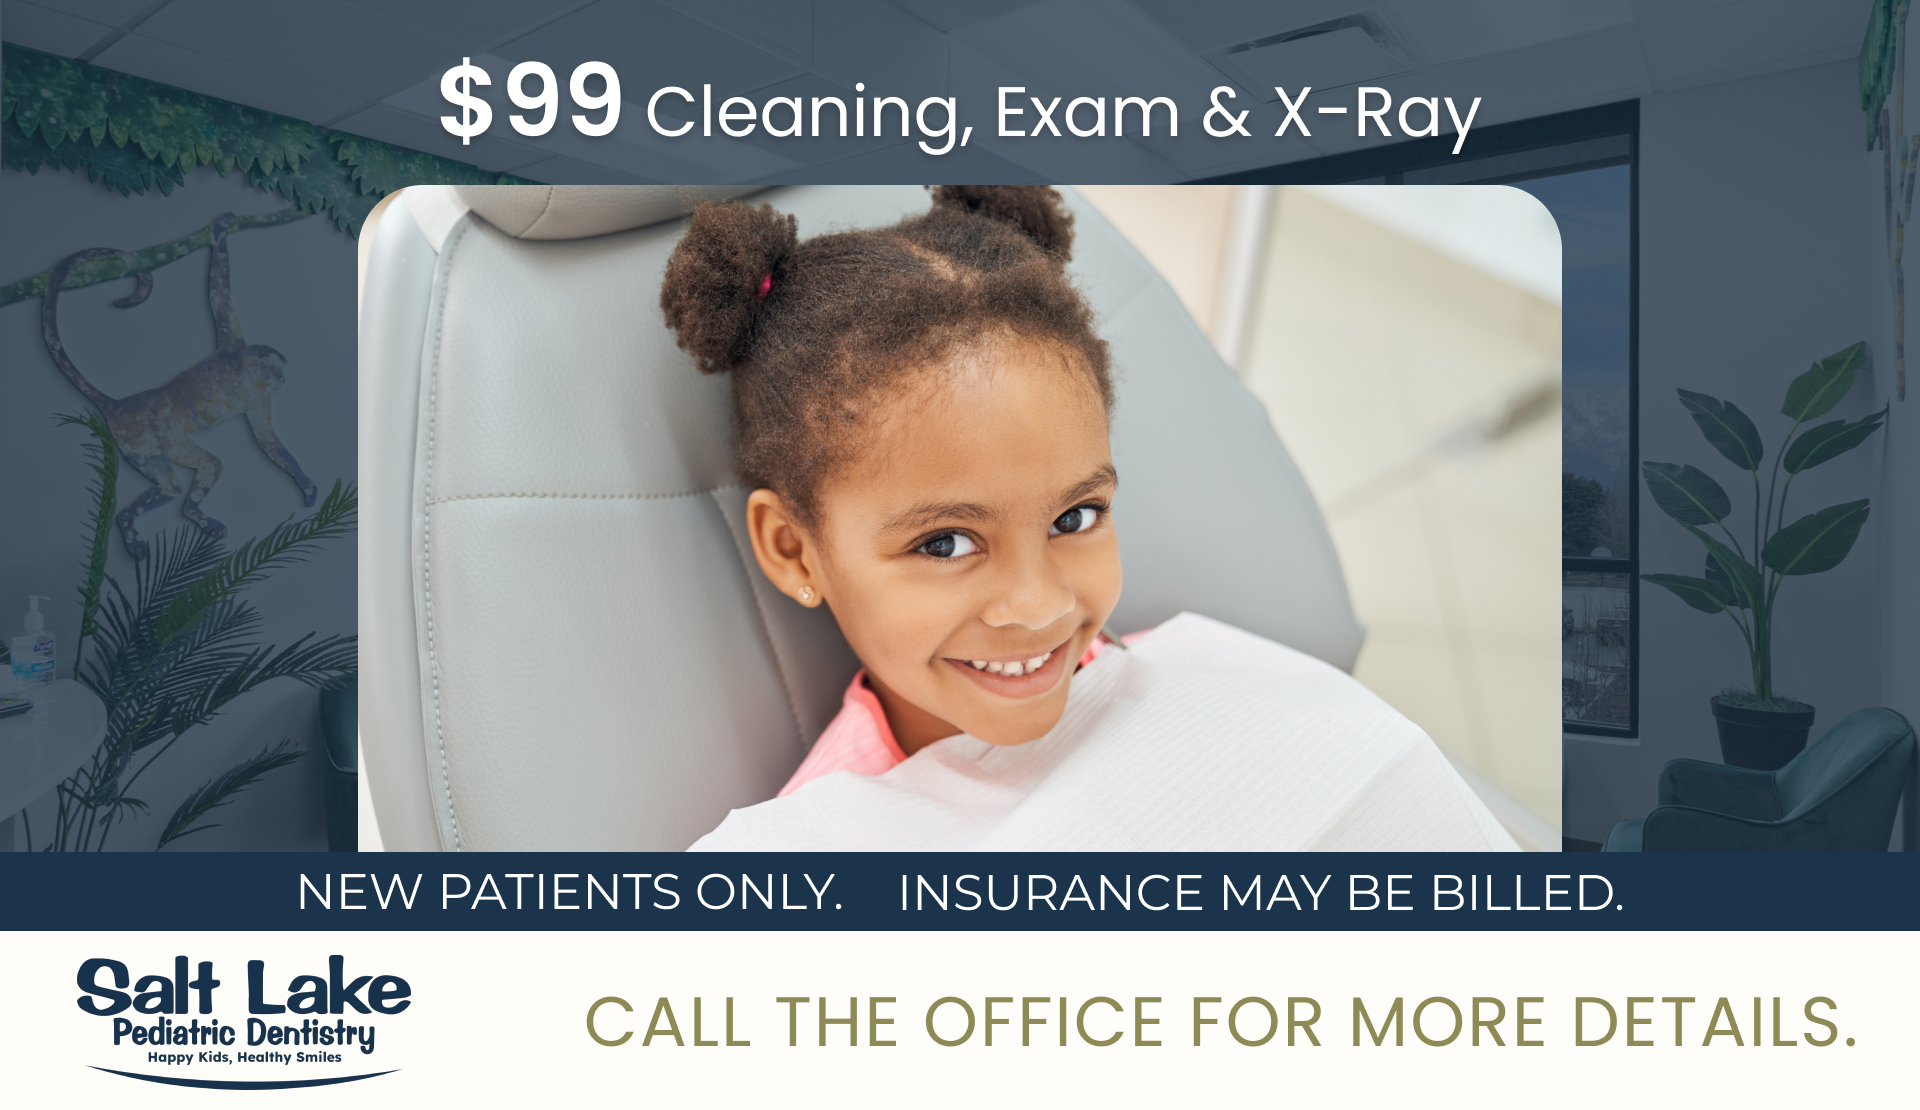 $79 Cleaning, Exam & X-Ray